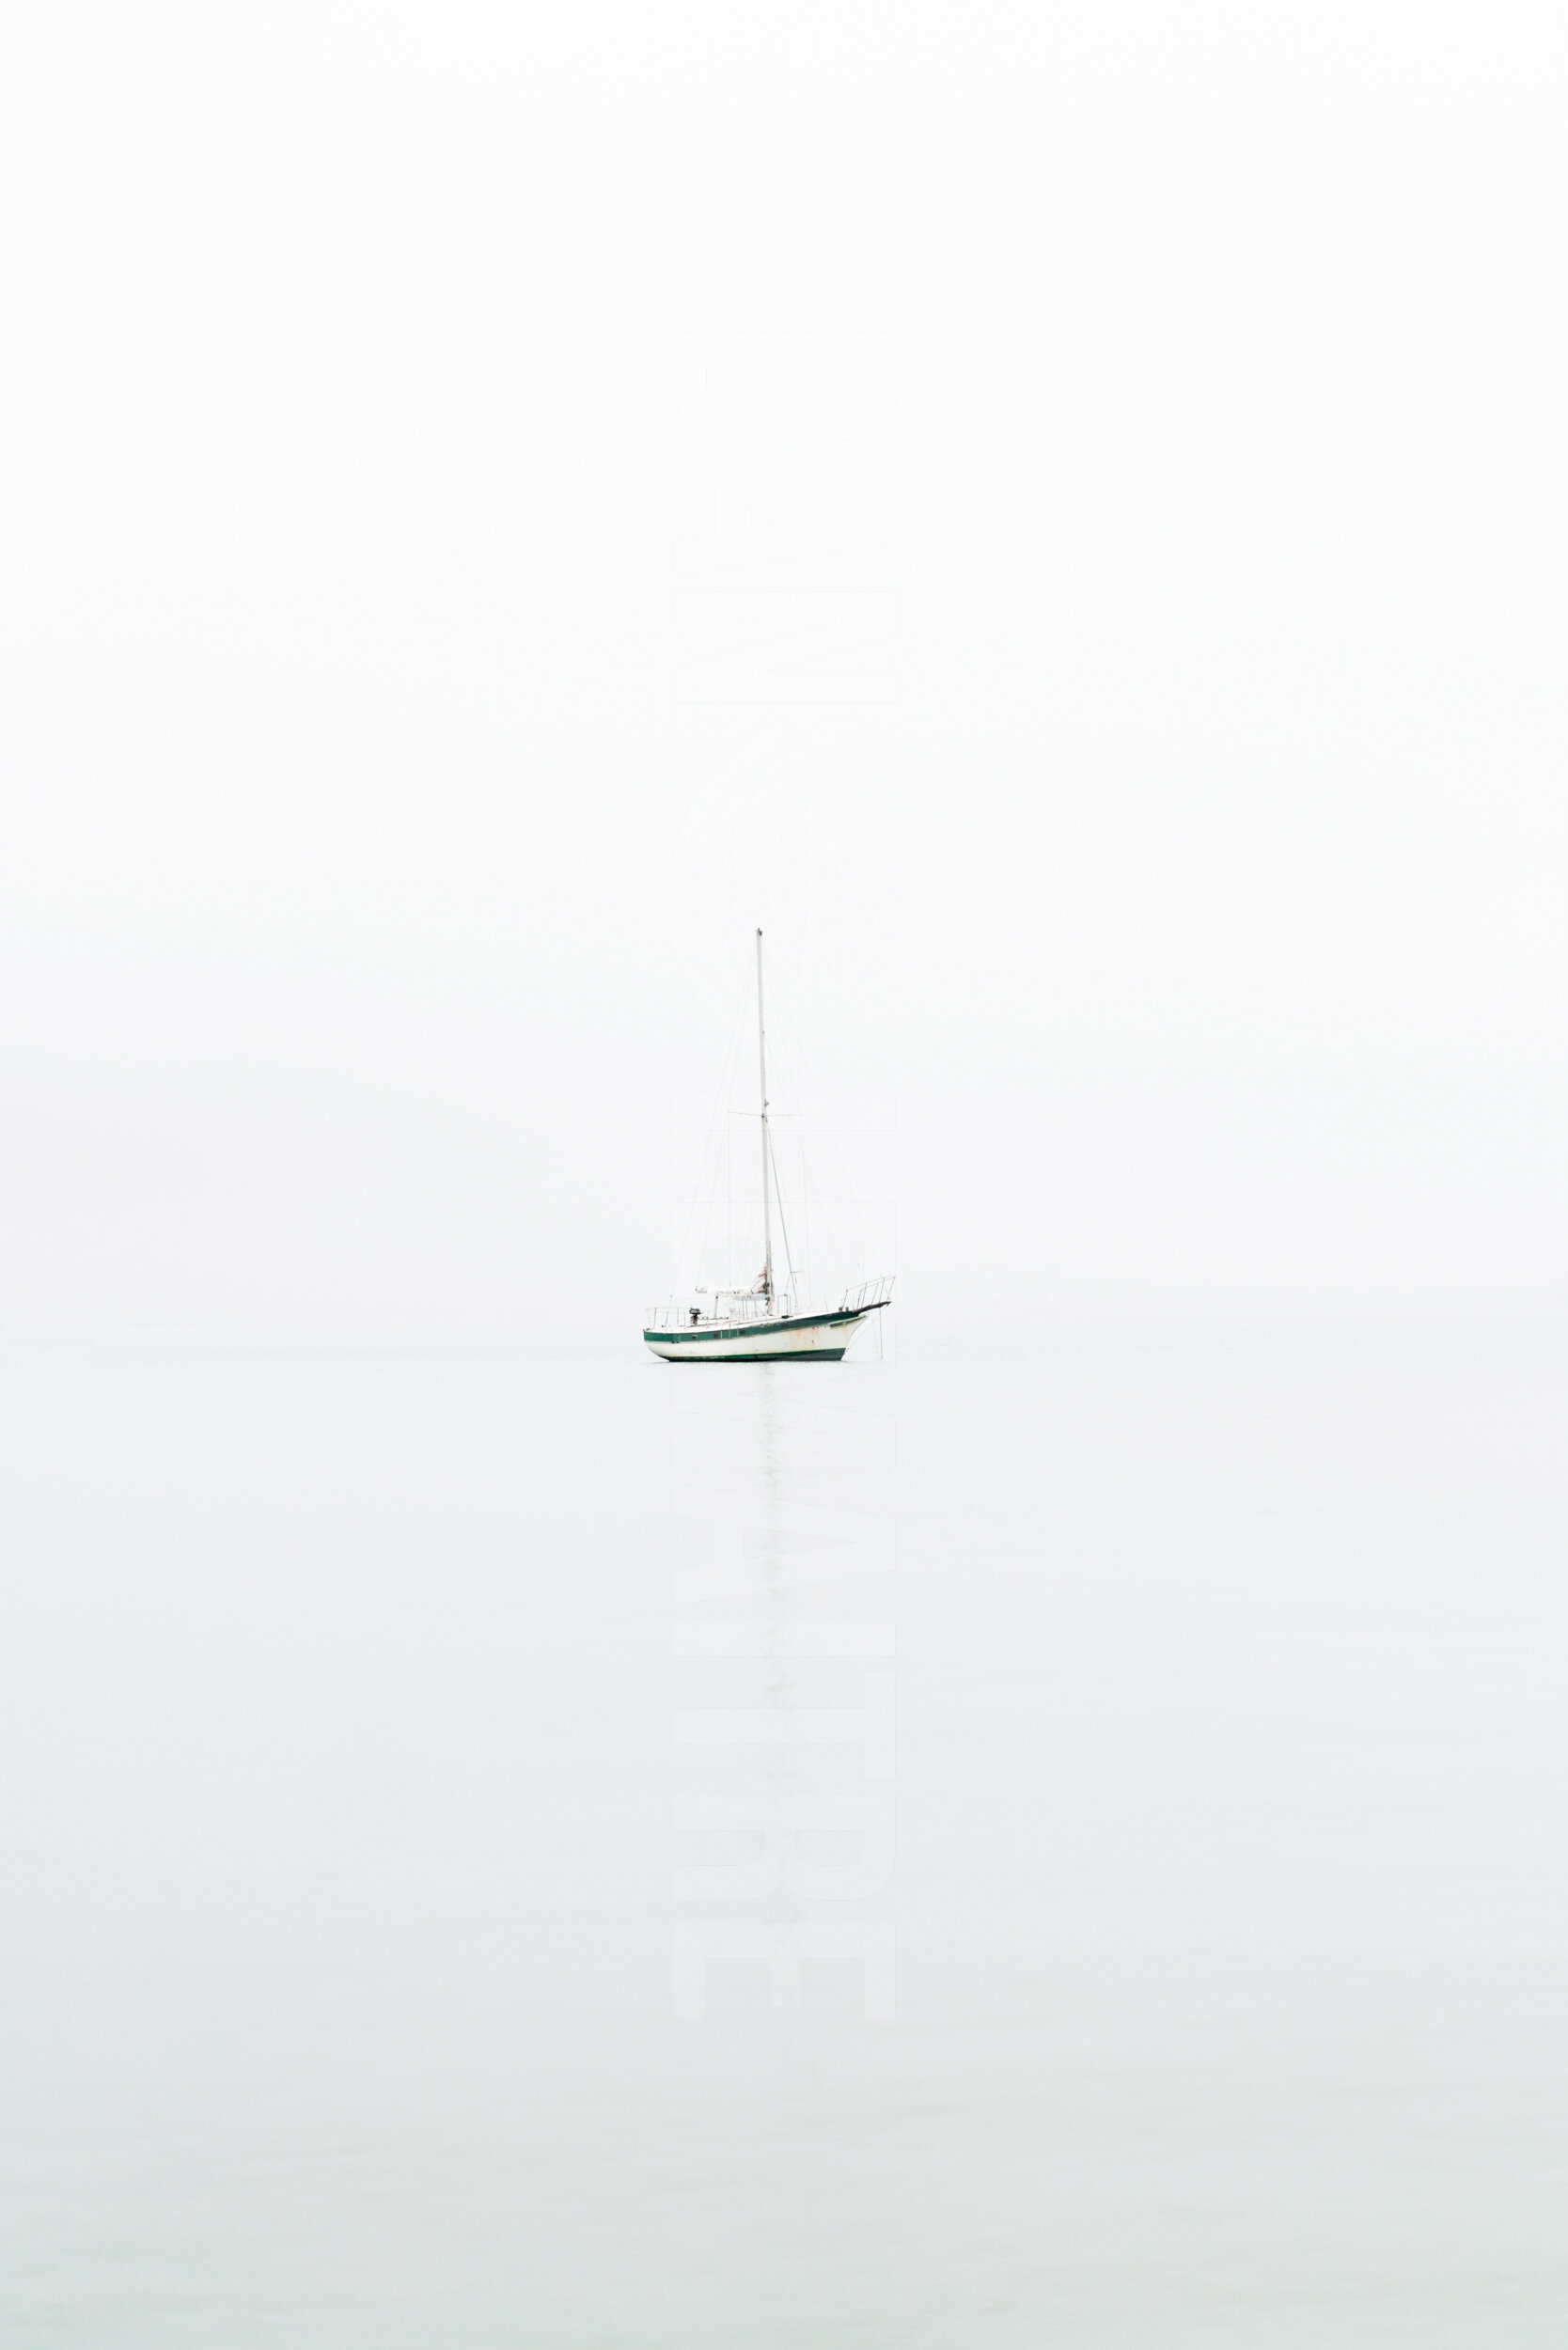 Moored in the Fog